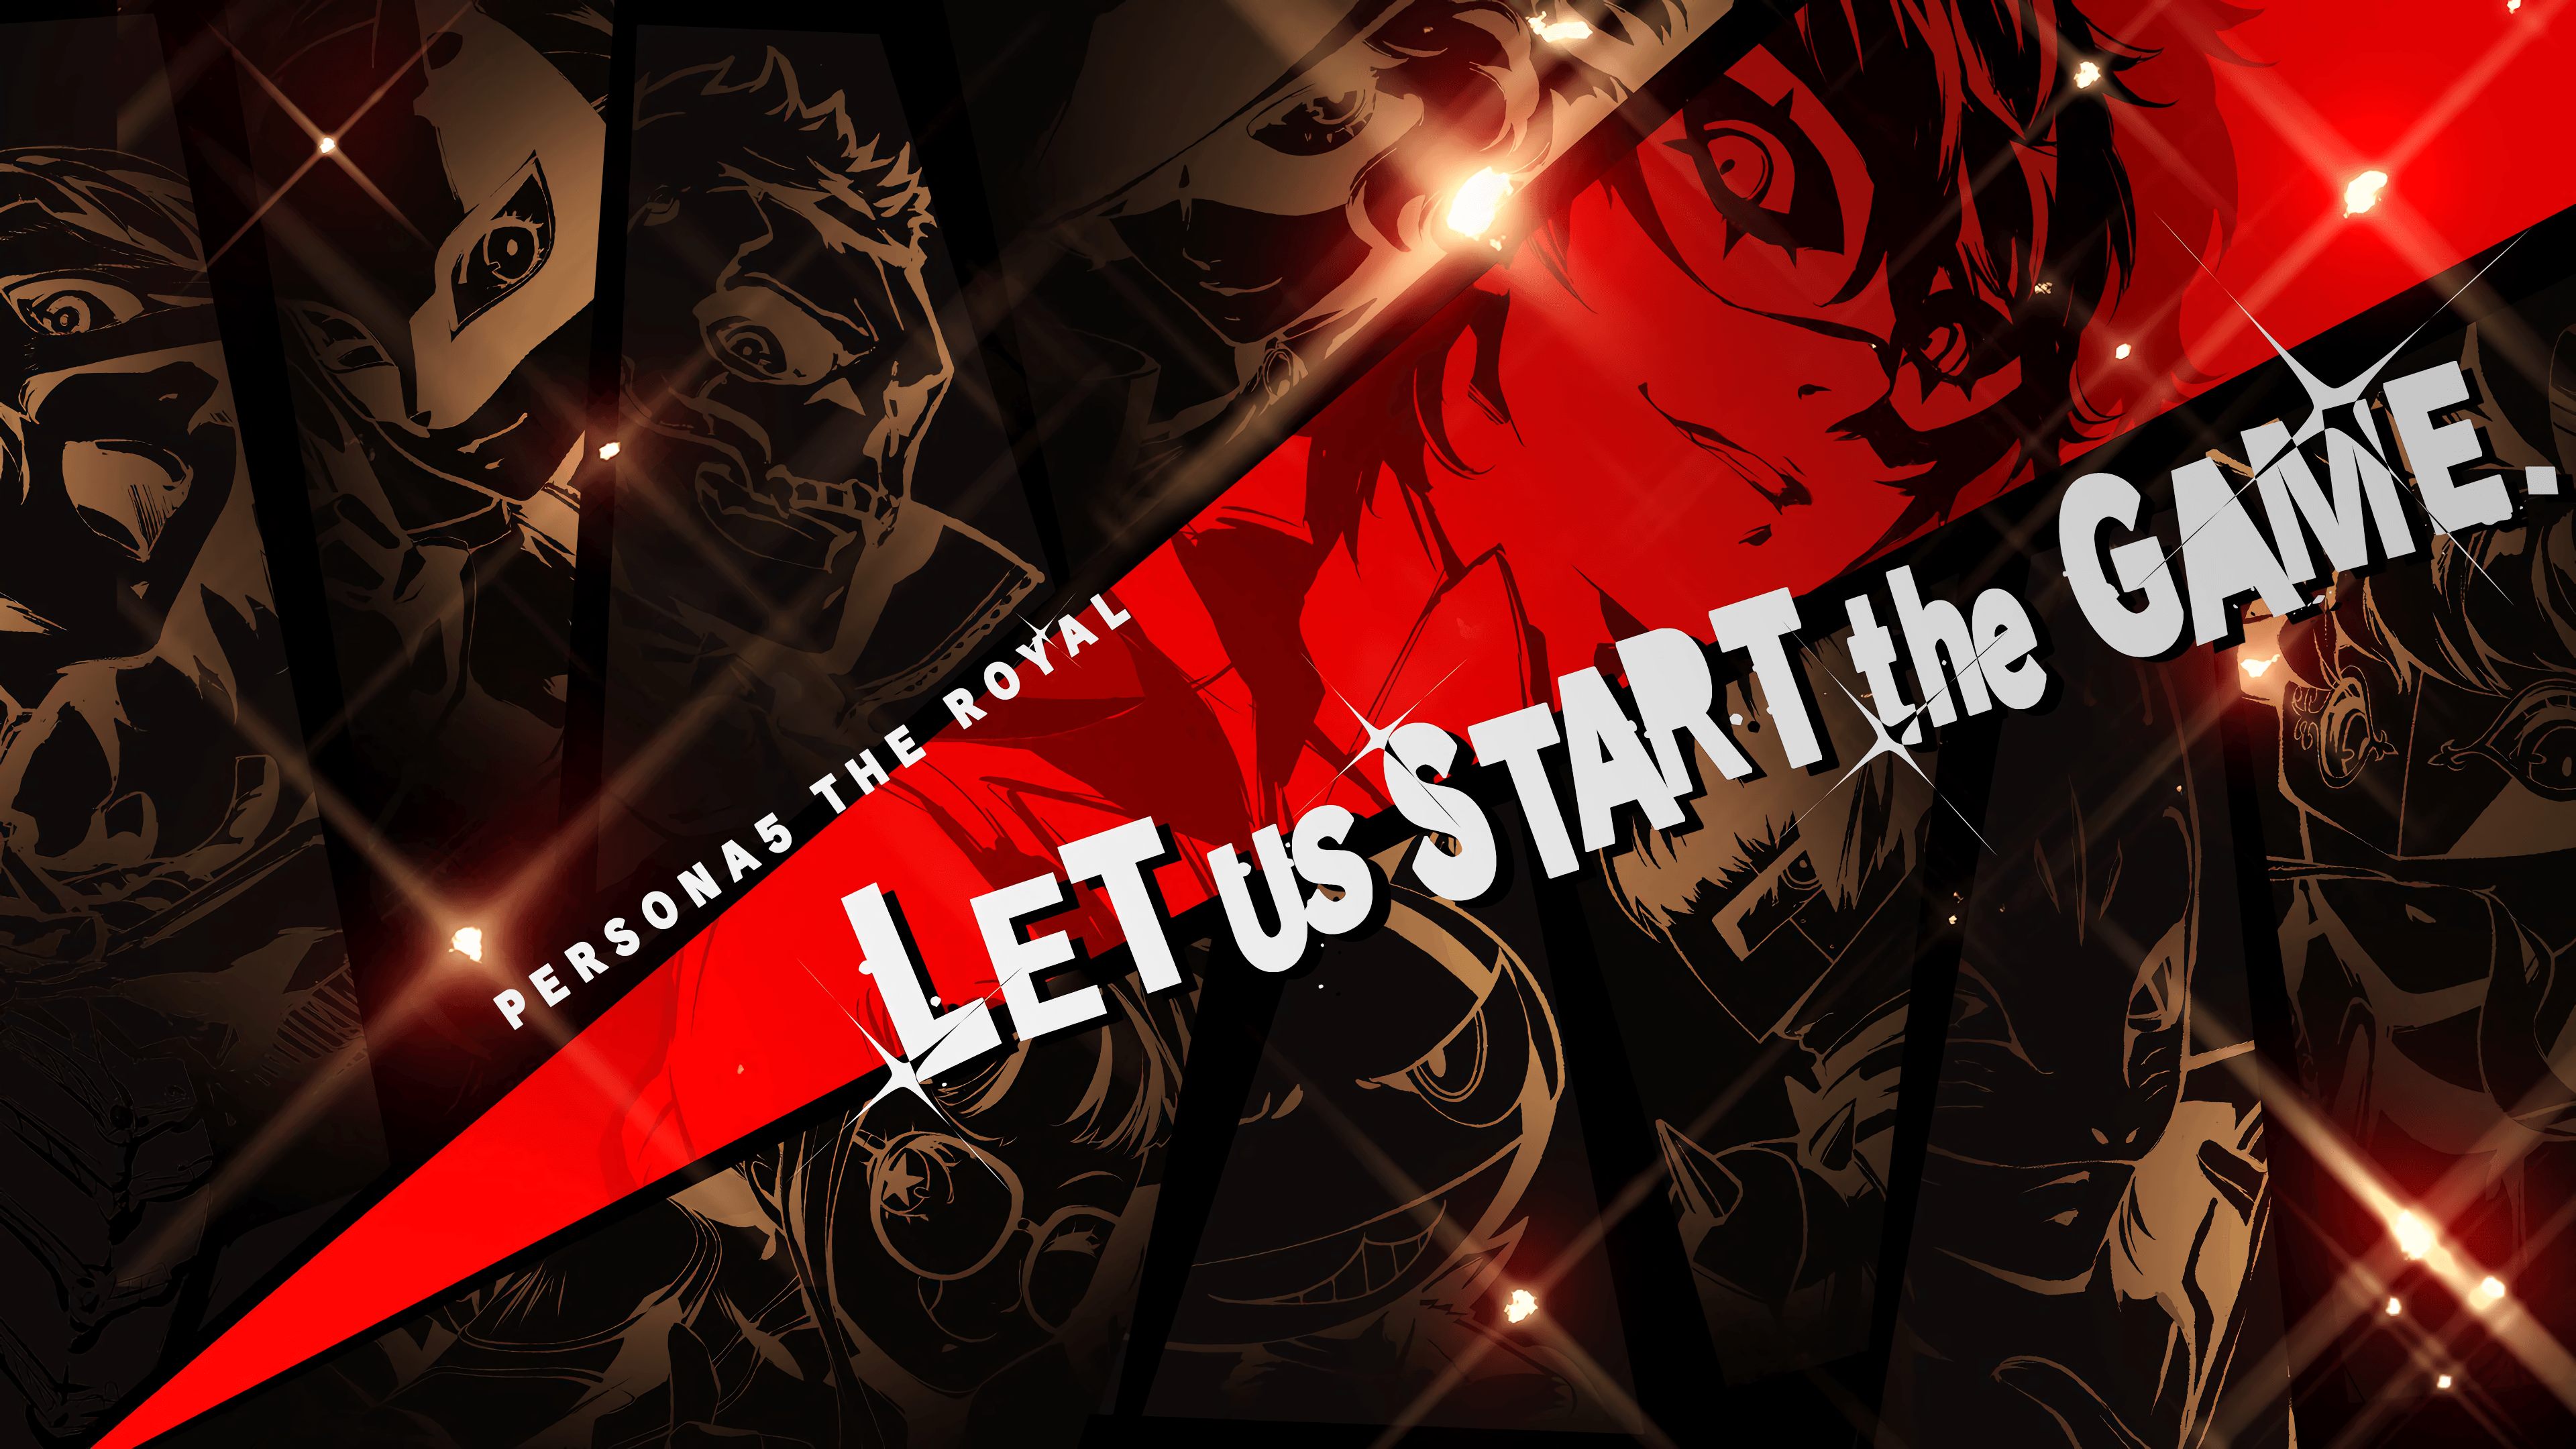 persona 5 royal requests